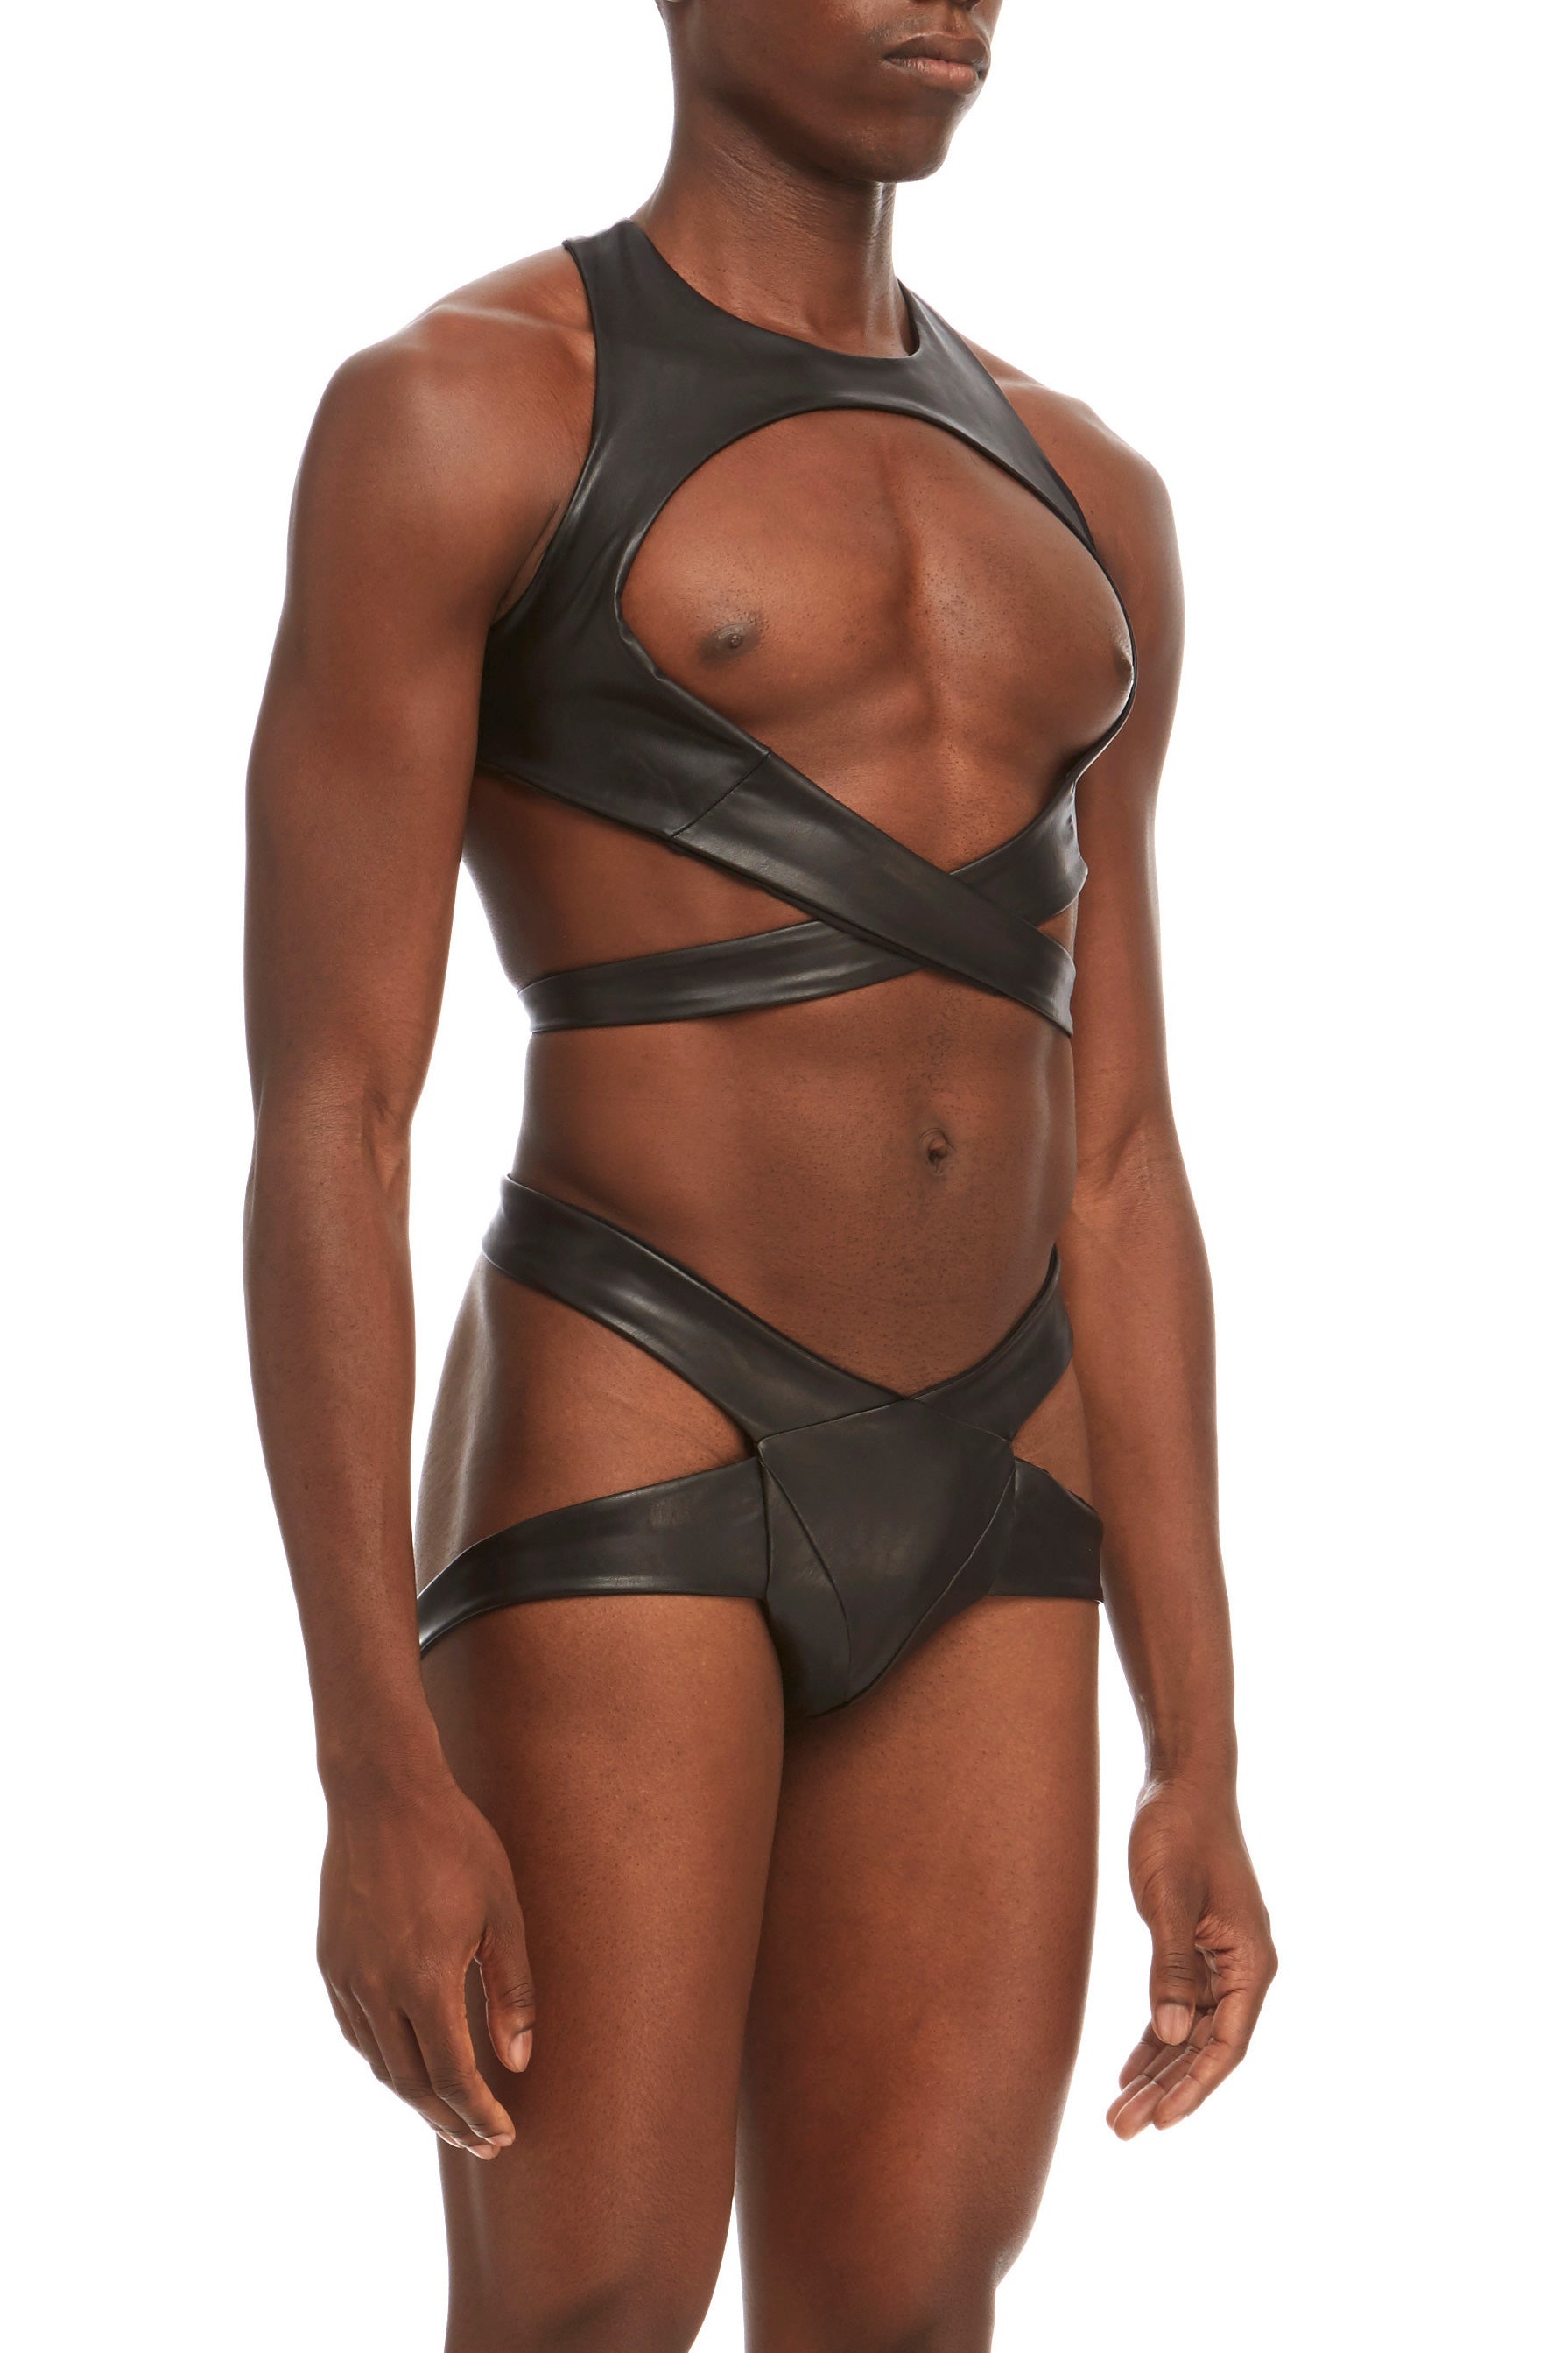 DSTM Maya mens harness and thong in vegan leather - side